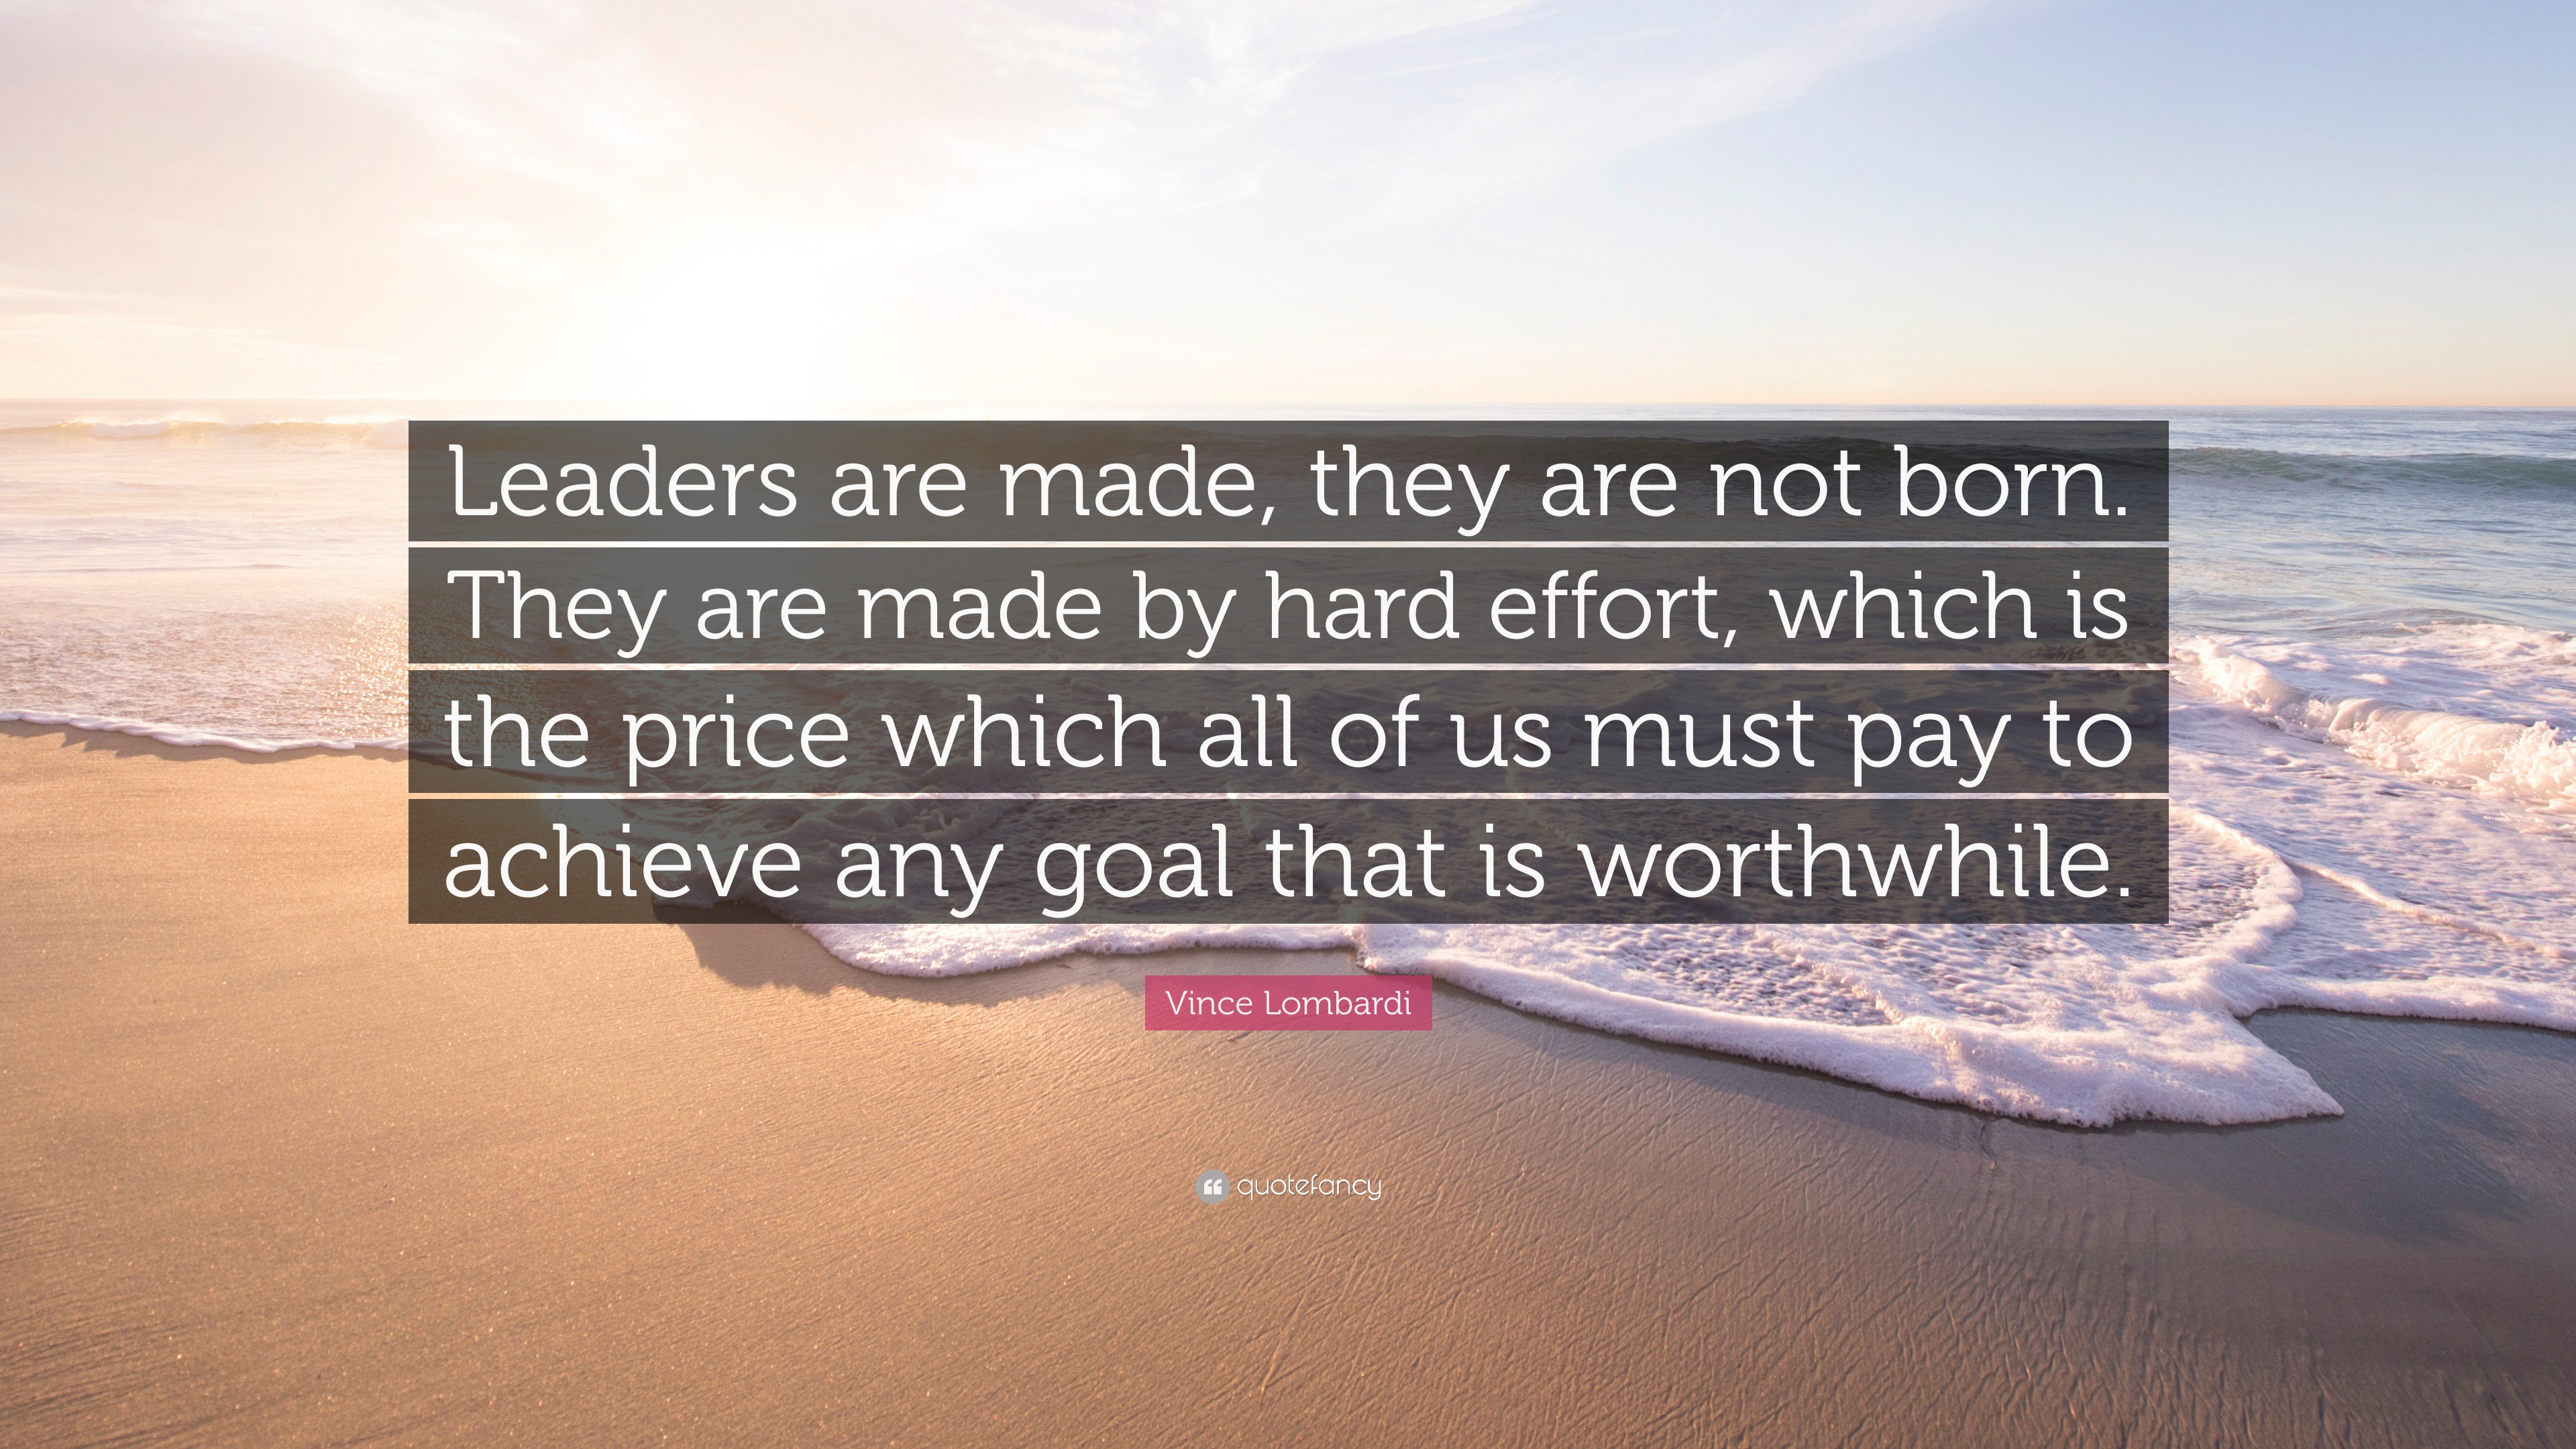 Vince Lombardi Quote “Leaders aren t born they are made They